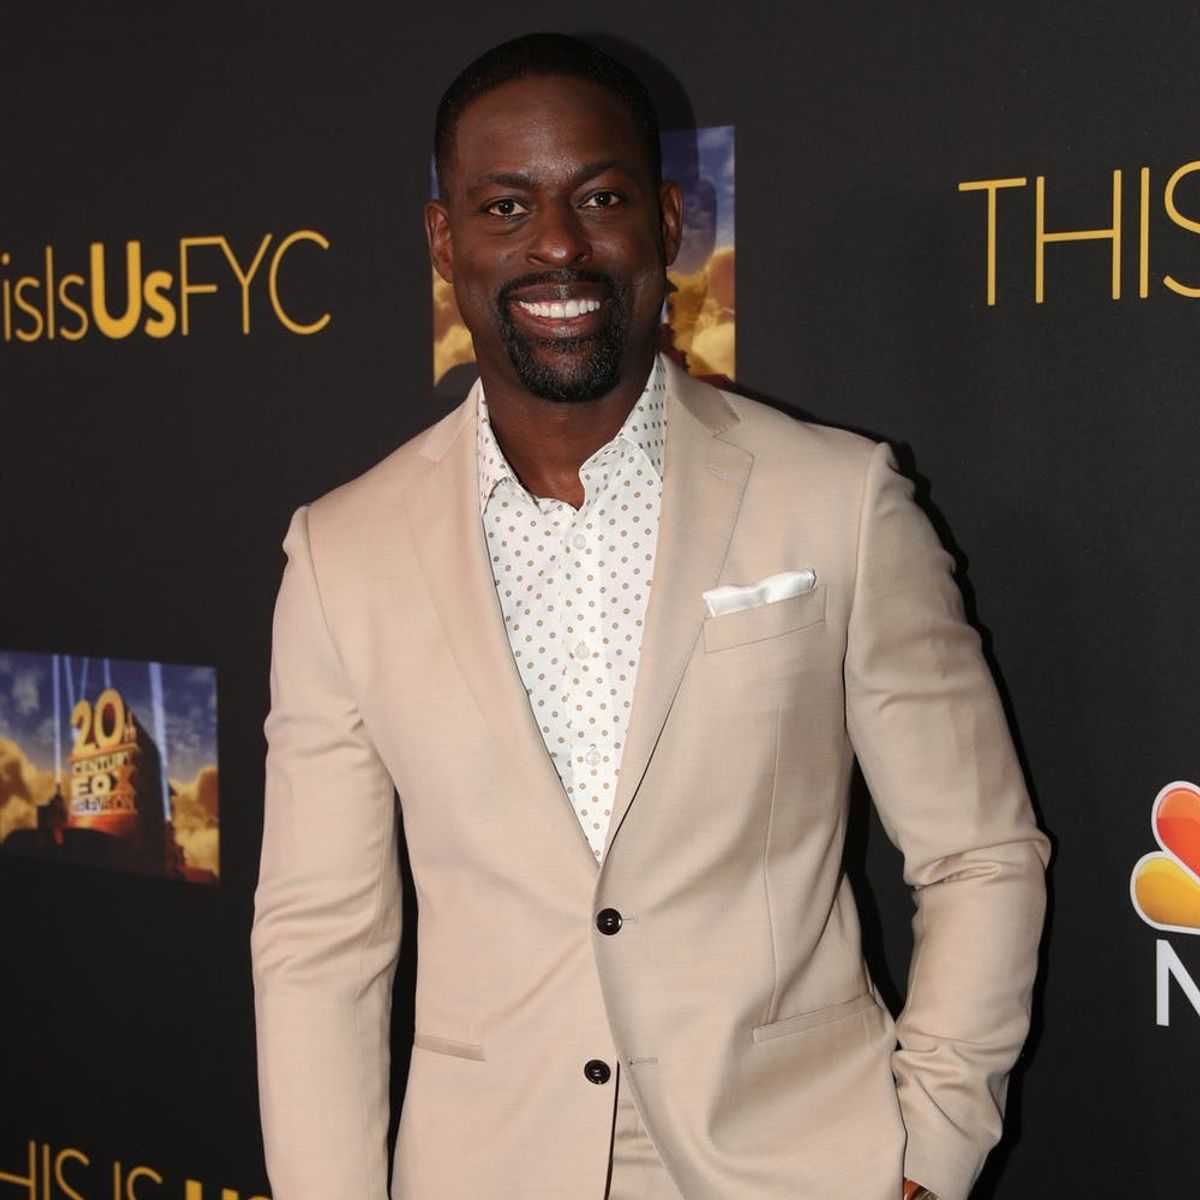 ‘This Is Us’ Star Sterling K. Brown Breaks Silence Over ‘Predator’ Scandal in Support of Olivia Munn